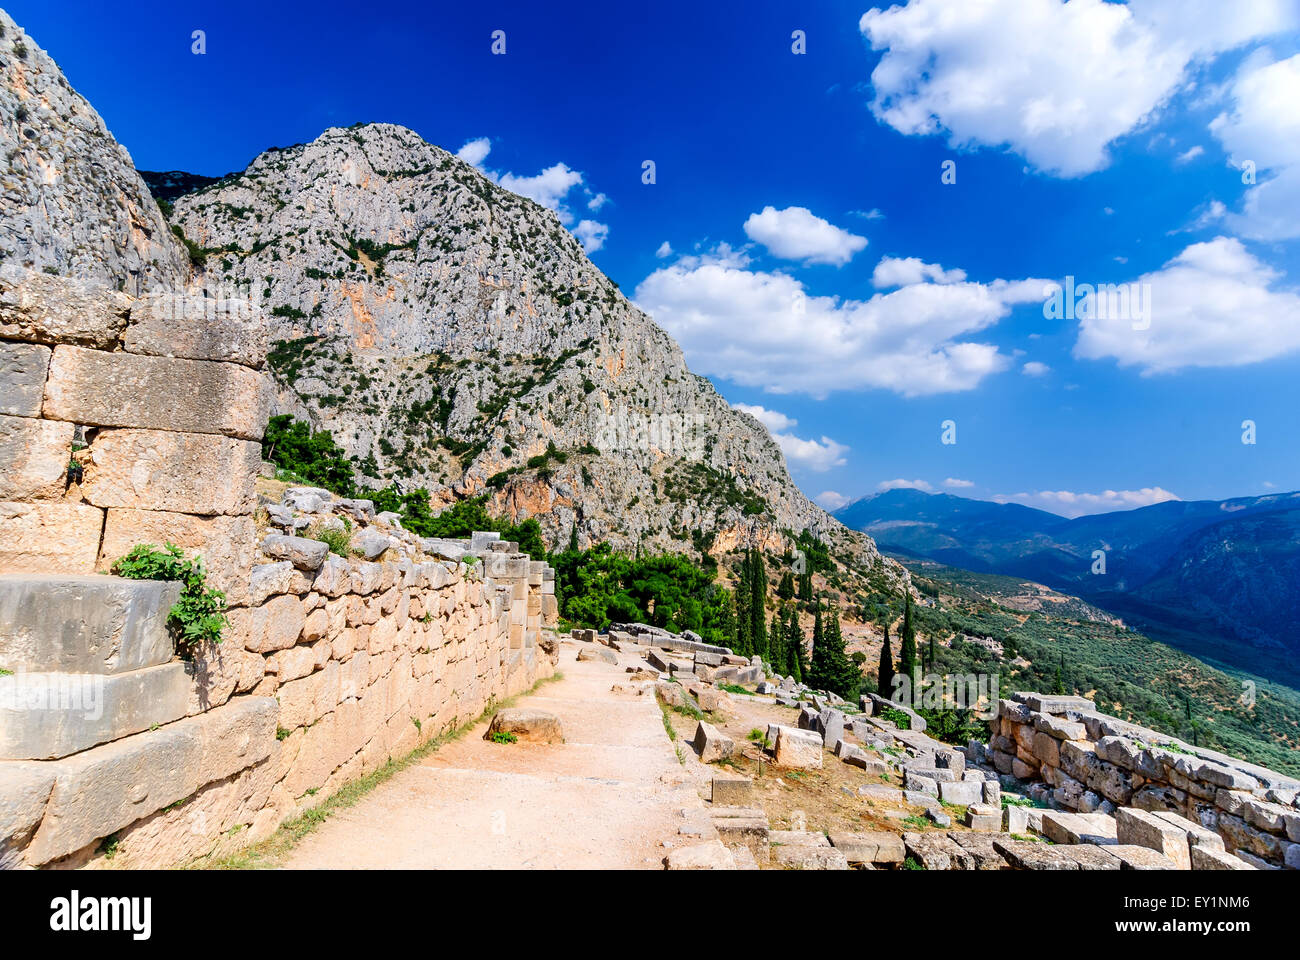 Ancient Greece. Ruins remains of the large temple of Apollo, Delphi, Greece, greek culture landmark. Stock Photo